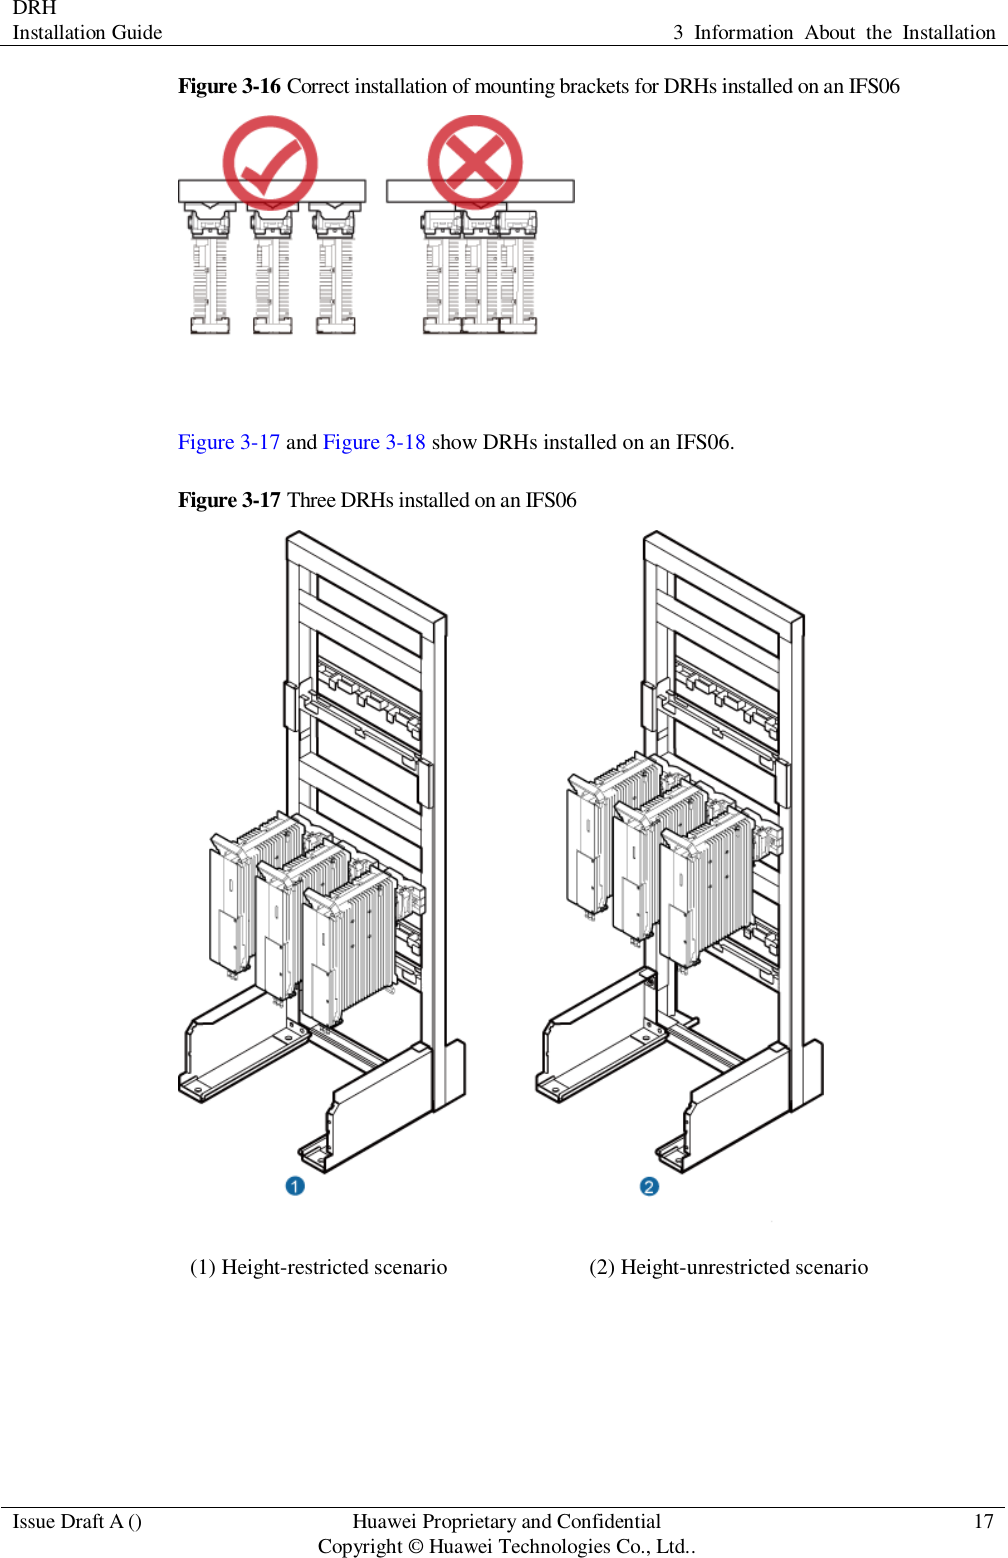 DRH   Installation Guide 3  Information  About  the  Installation  Issue Draft A () Huawei Proprietary and Confidential                                     Copyright © Huawei Technologies Co., Ltd.. 17  Figure 3-16 Correct installation of mounting brackets for DRHs installed on an IFS06   Figure 3-17 and Figure 3-18 show DRHs installed on an IFS06. Figure 3-17 Three DRHs installed on an IFS06  (1) Height-restricted scenario (2) Height-unrestricted scenario  